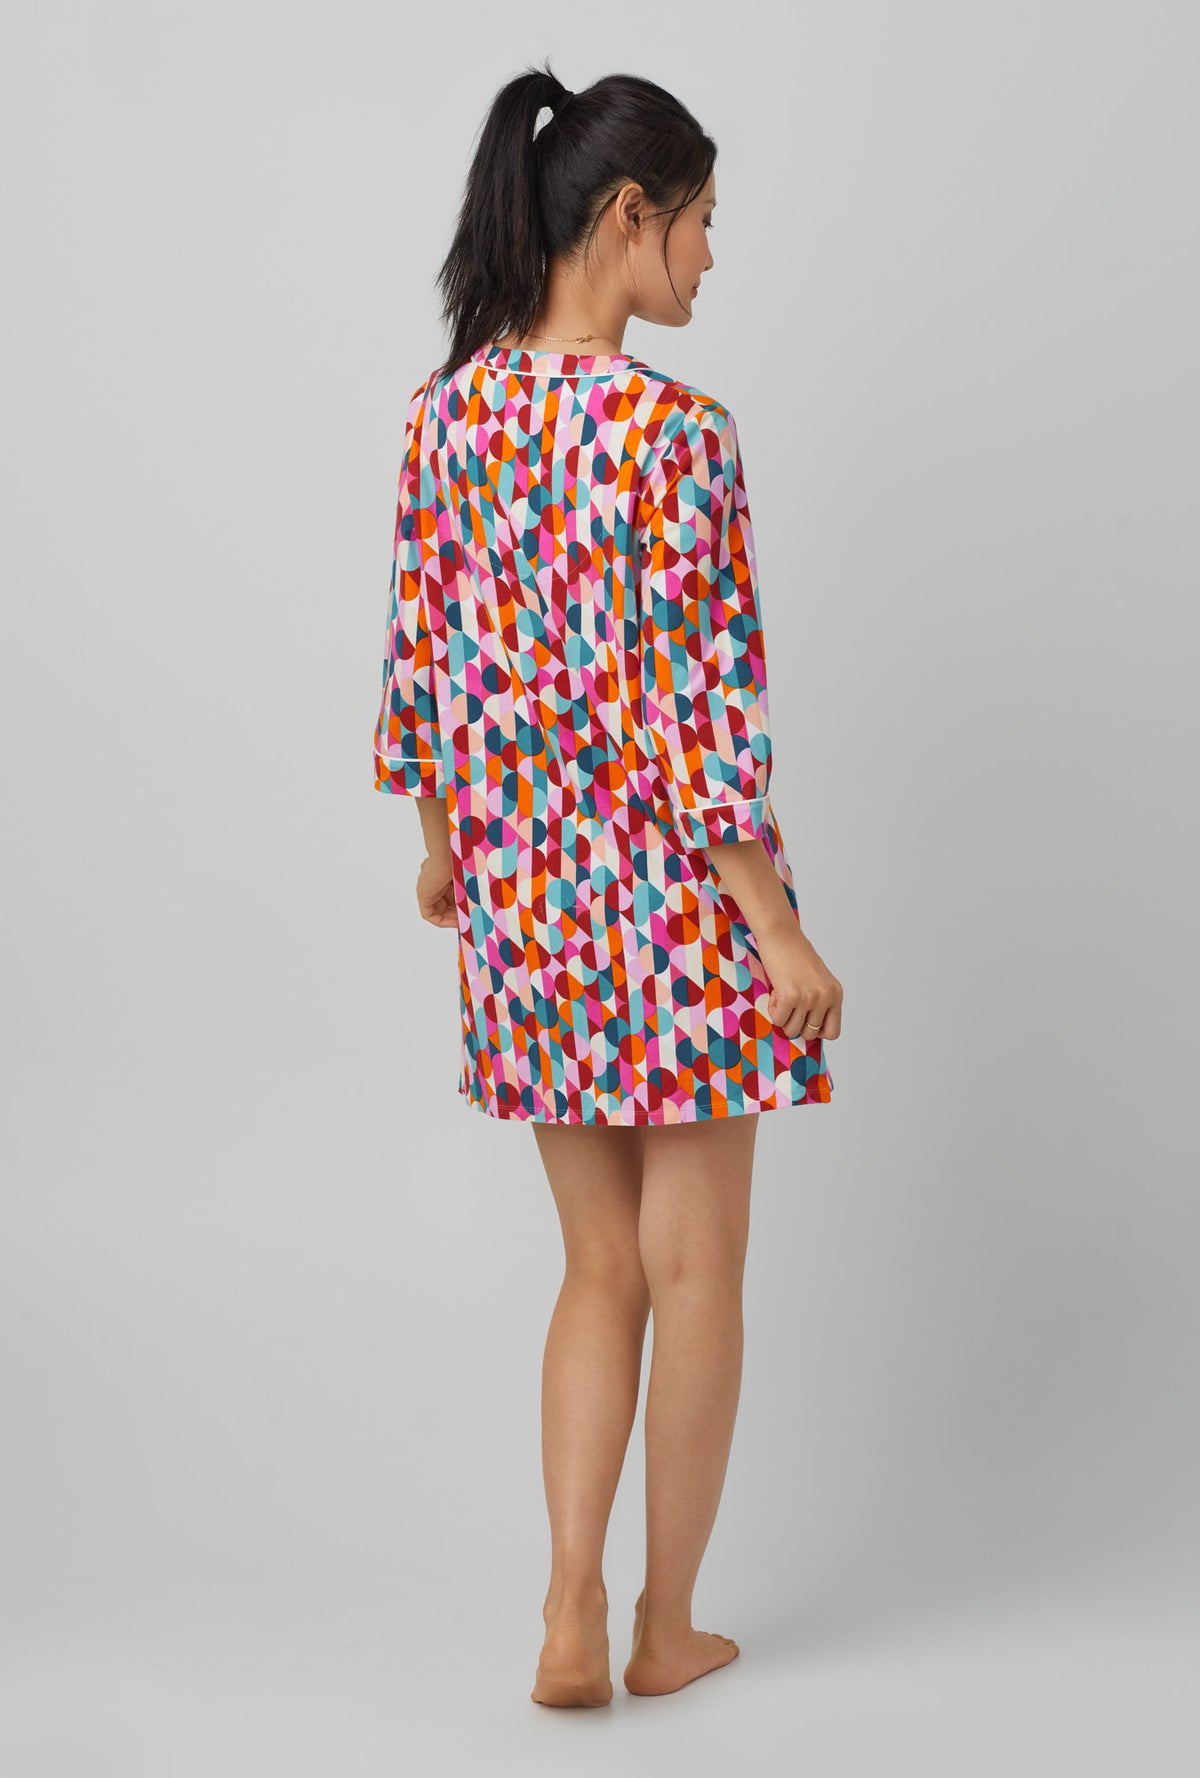 A lady wearing 3/4 Sleeve Stretch Jersey Sleepshirt with dancing dots print